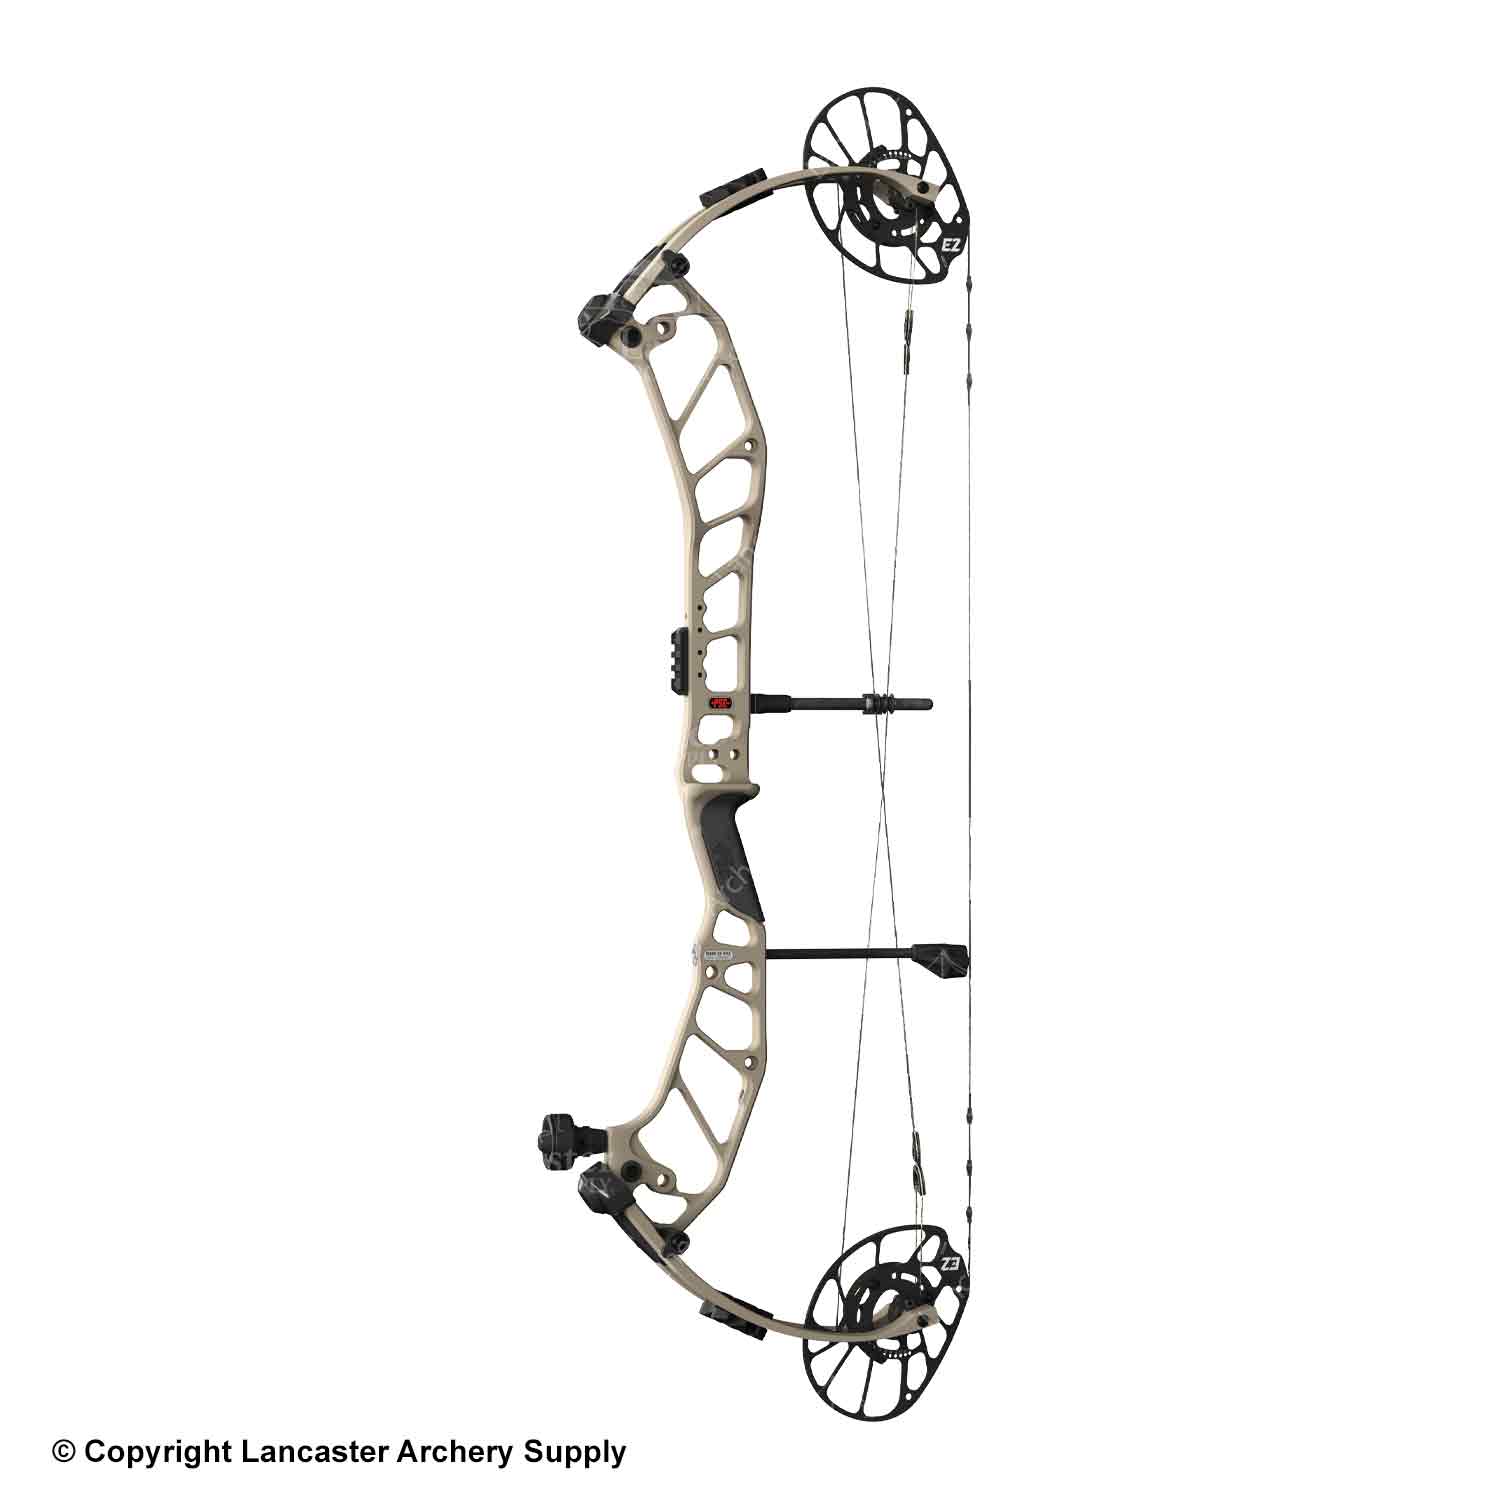 PSE Fortis 33 Compound Hunting Bow (E2)